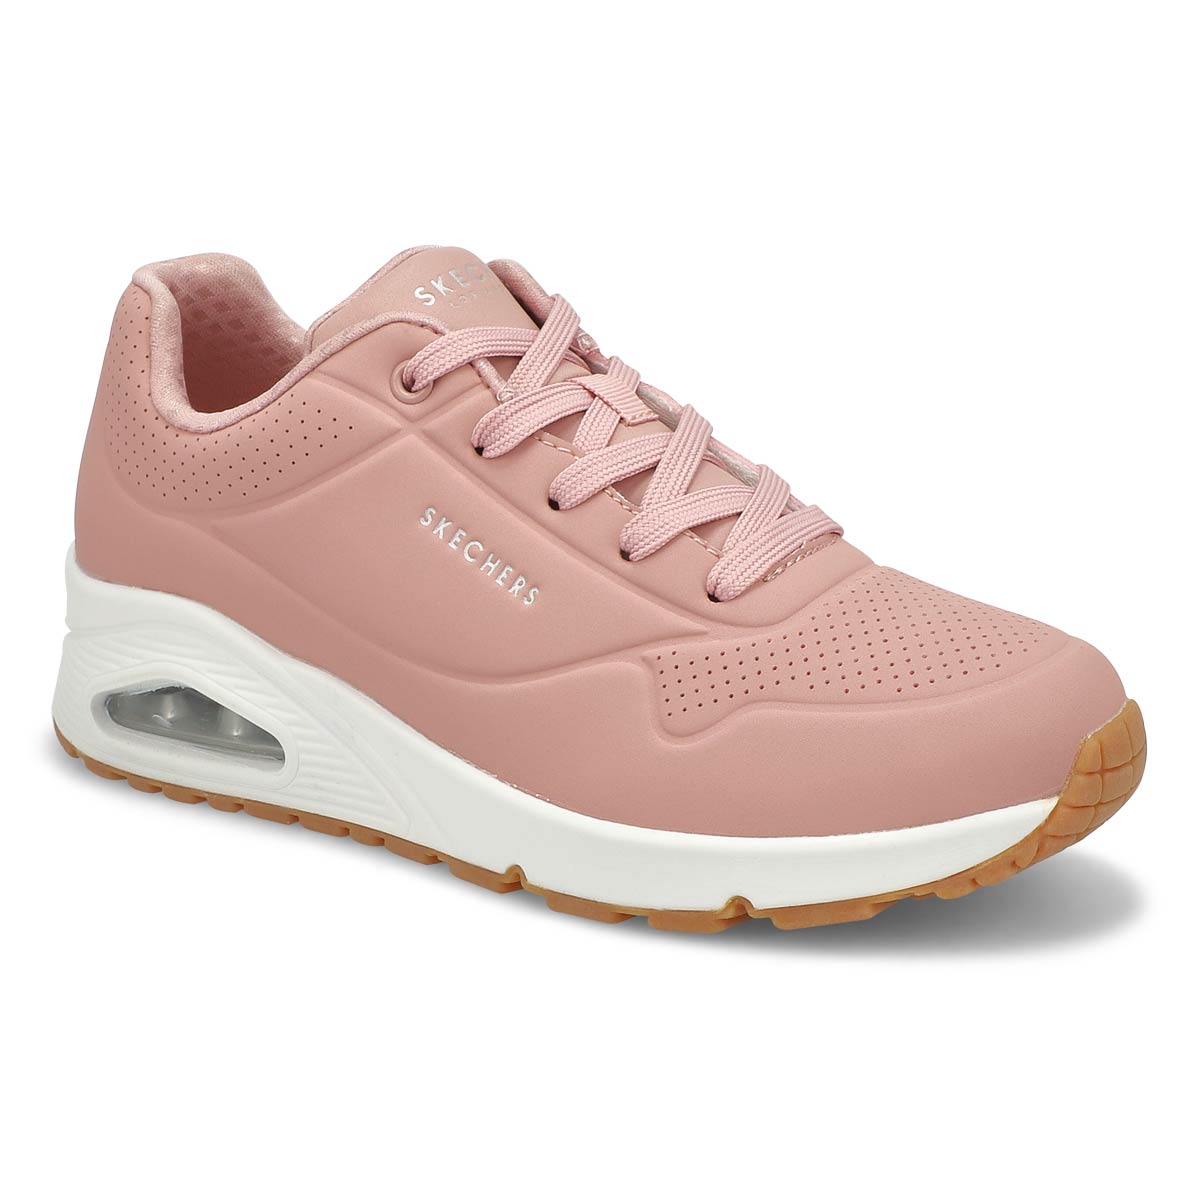 Skechers Women's Uno Stand On Air Sneaker - W | SoftMoc.com